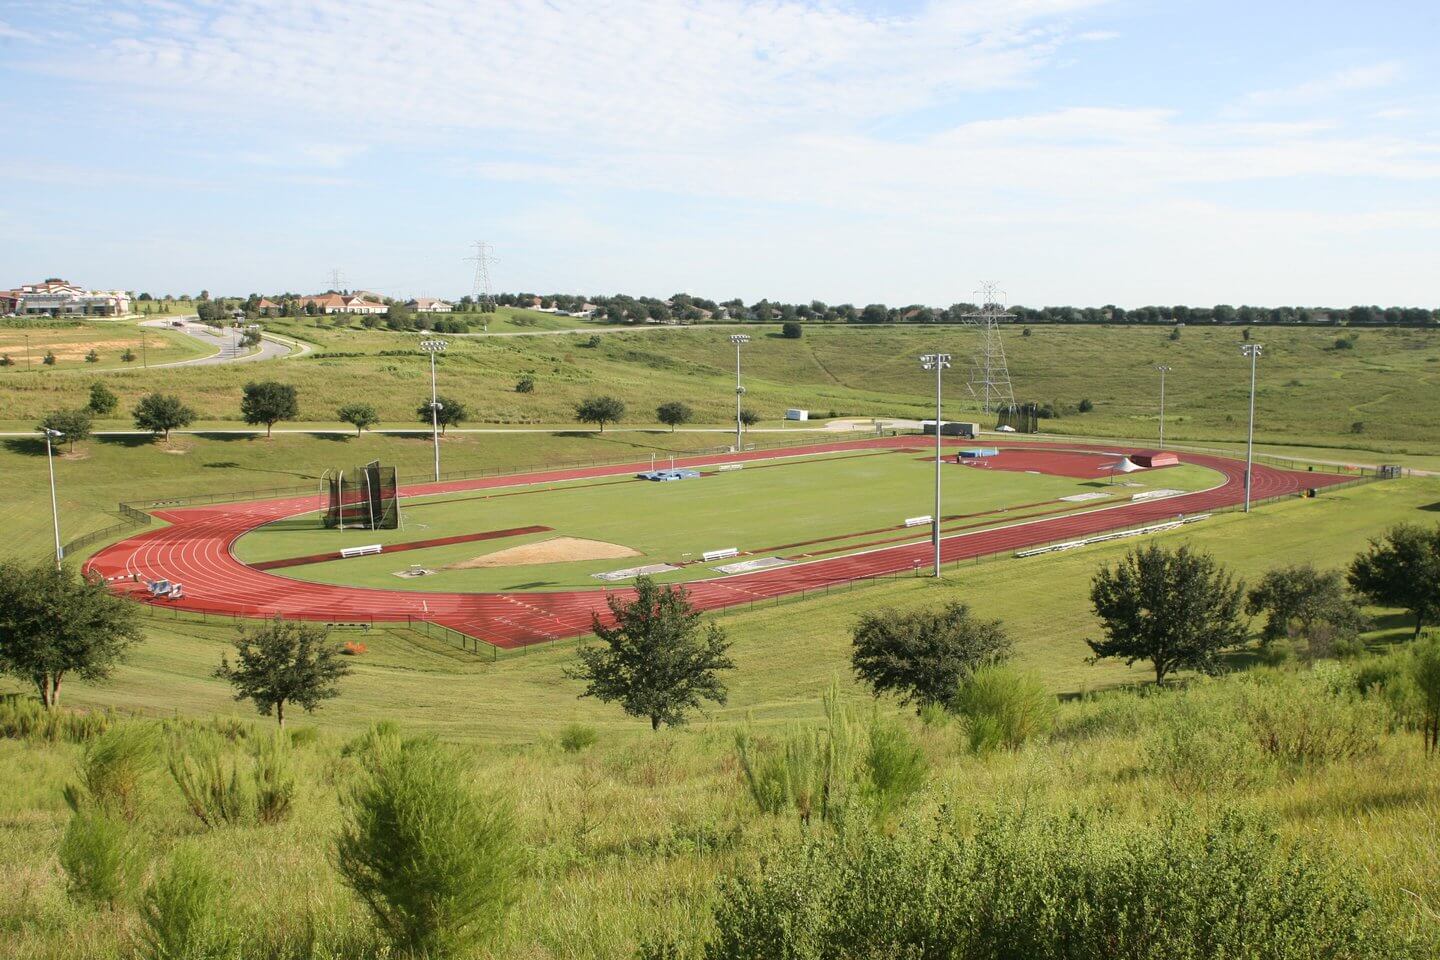 National Training Center's red turf track and green grass fields